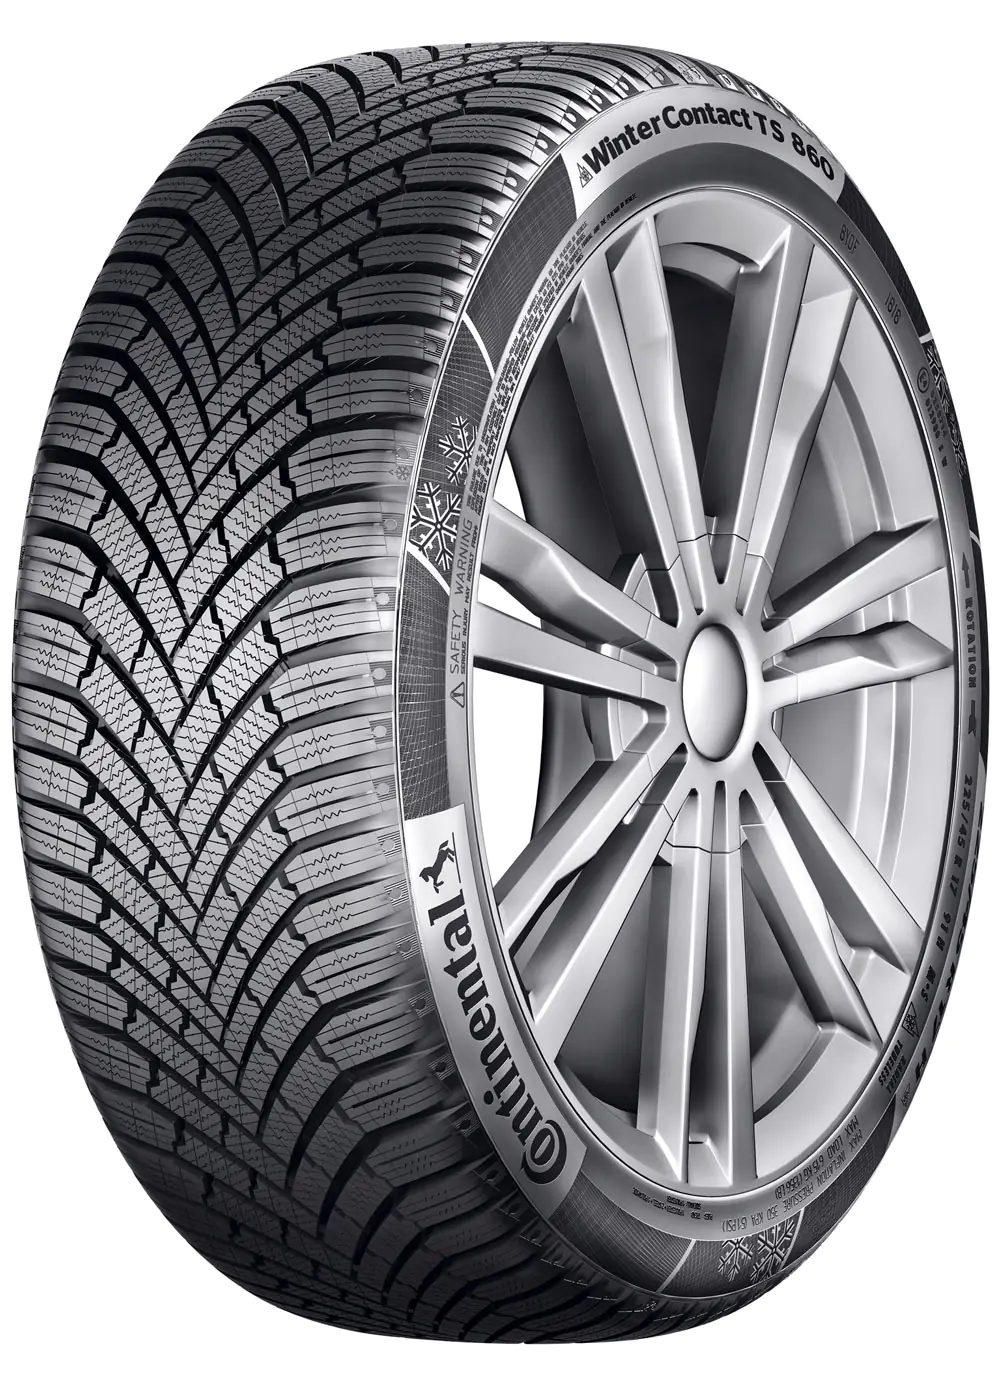 Gomme Autovettura Continental 325/40 R22 114V WINTER CONTACT TS870P M+S Invernale